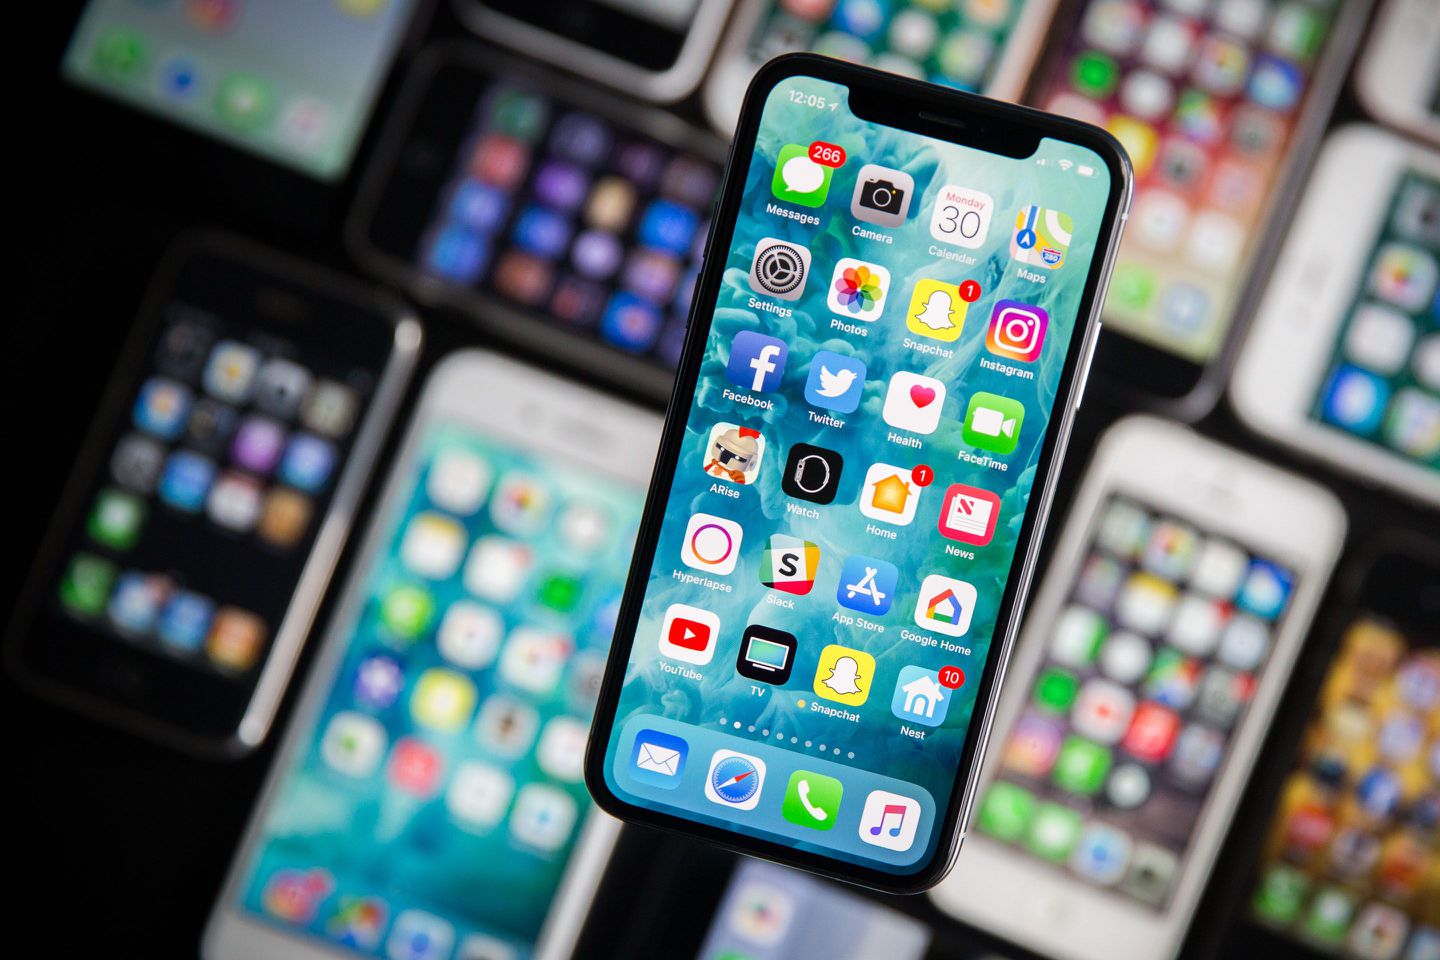 LG is reportedly struggling to meet Apple's demand for iPhone OLED displays